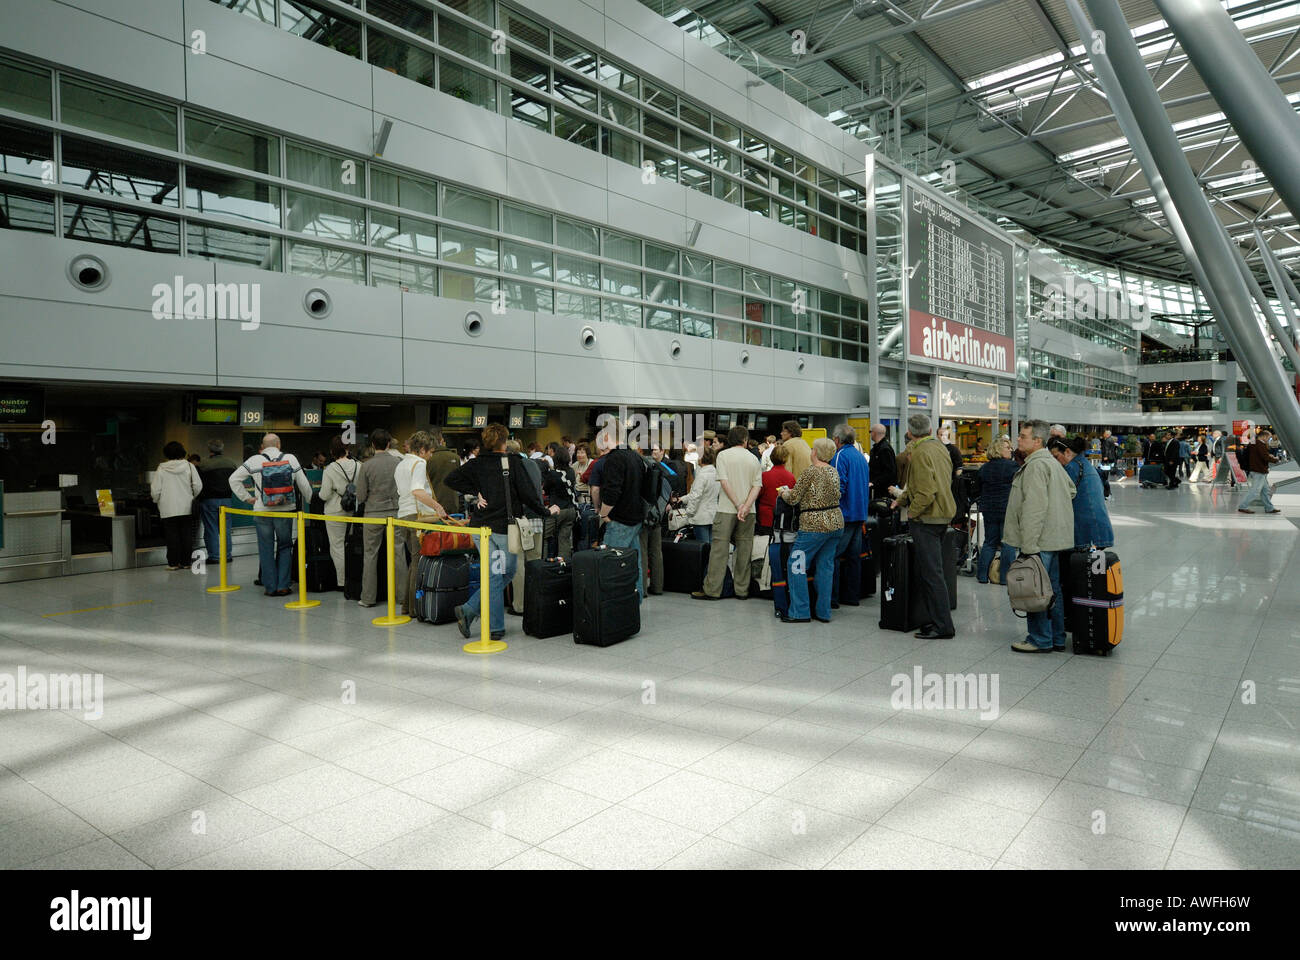 Waiting queues at Duesseldorf International Airport, Germany, Europe Stock Photo